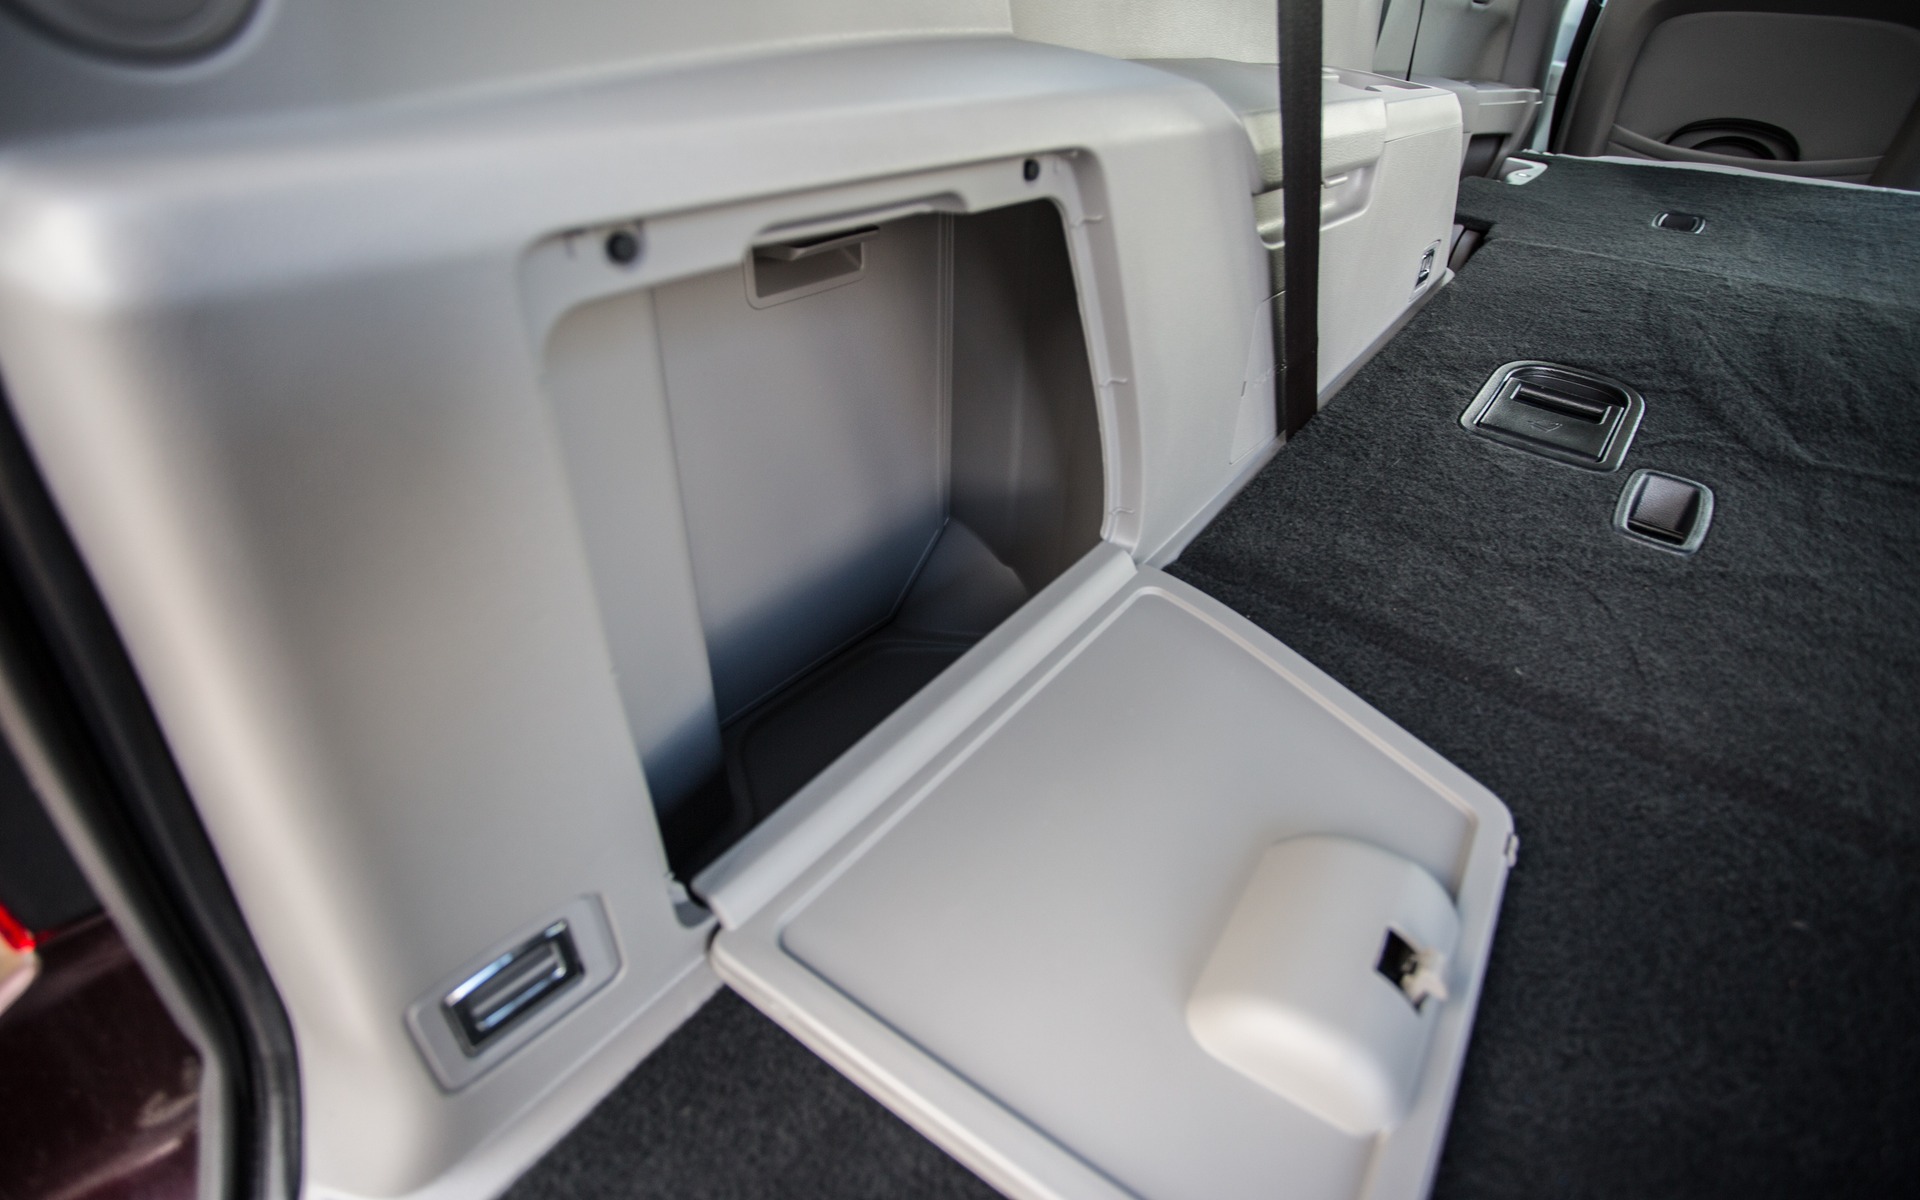 The Pilot is stuffed with small, useful storage spaces.